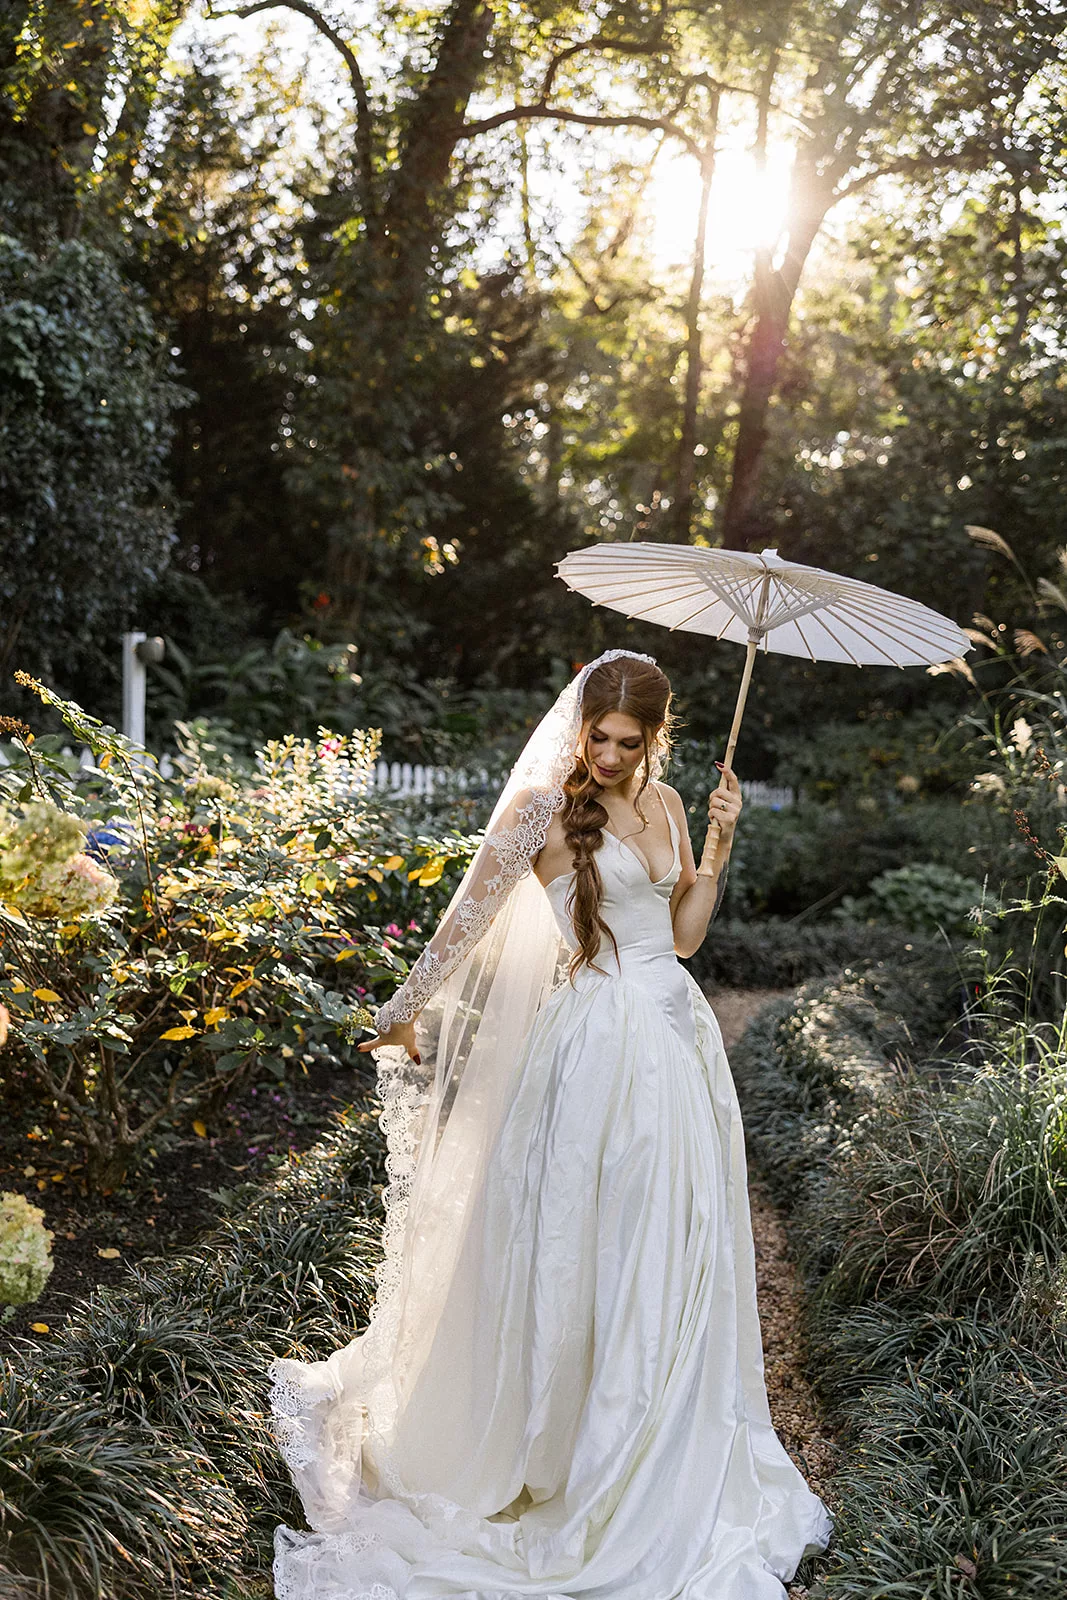 A bride plays with her veil while walking through a Wildflower 301 garden path with an umbrella at sunset